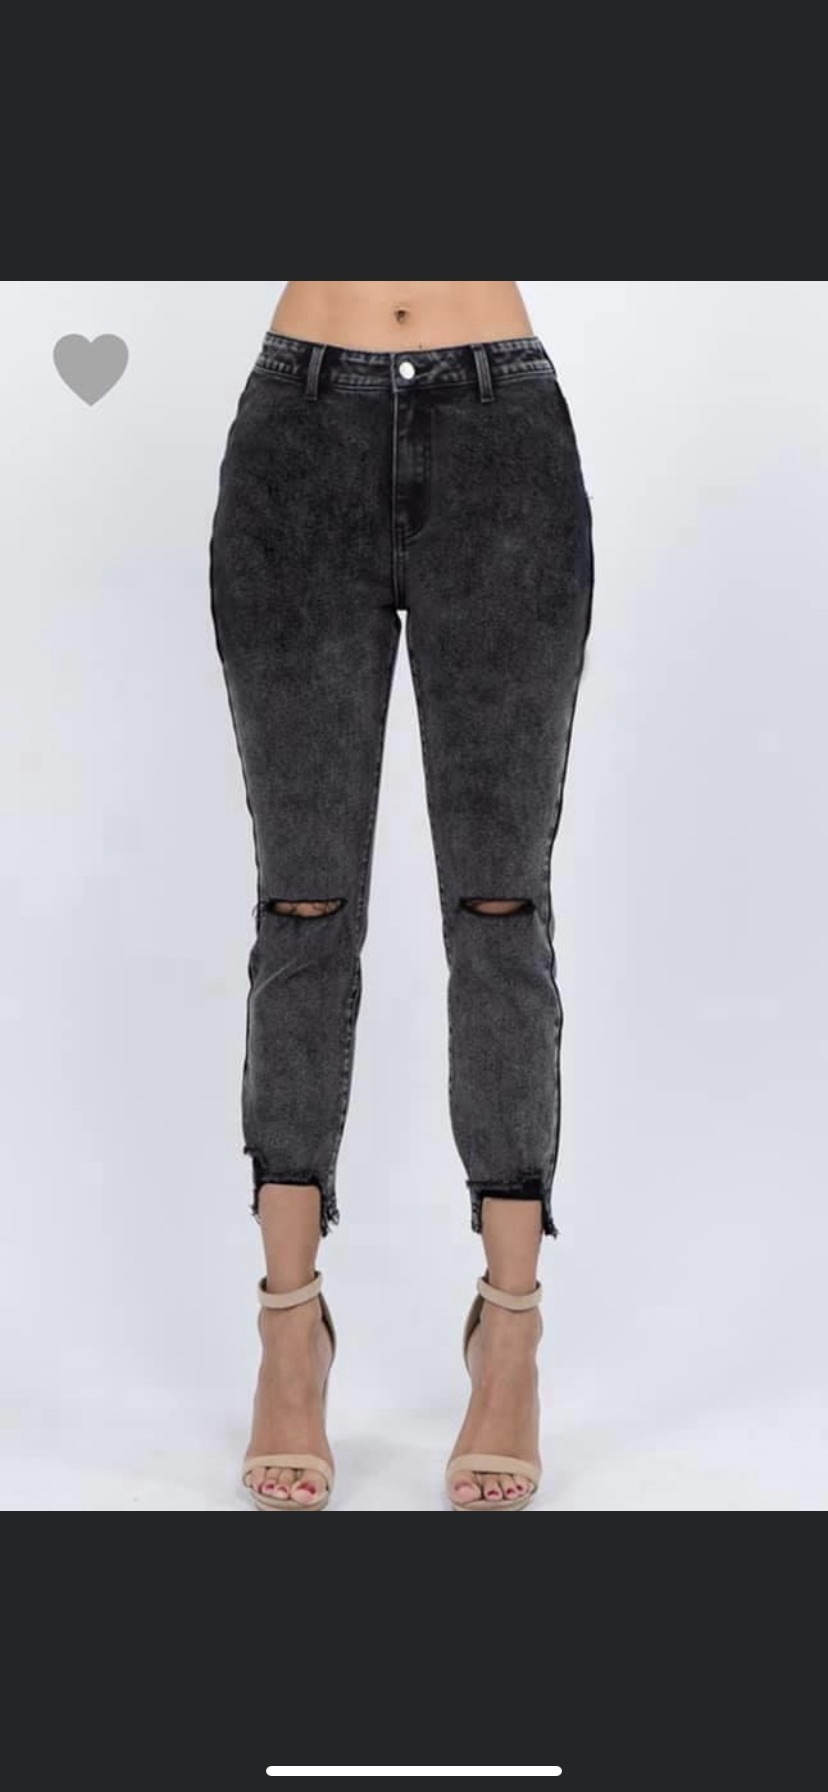 Peek-a-boo Jeans - Iconic Style Shop